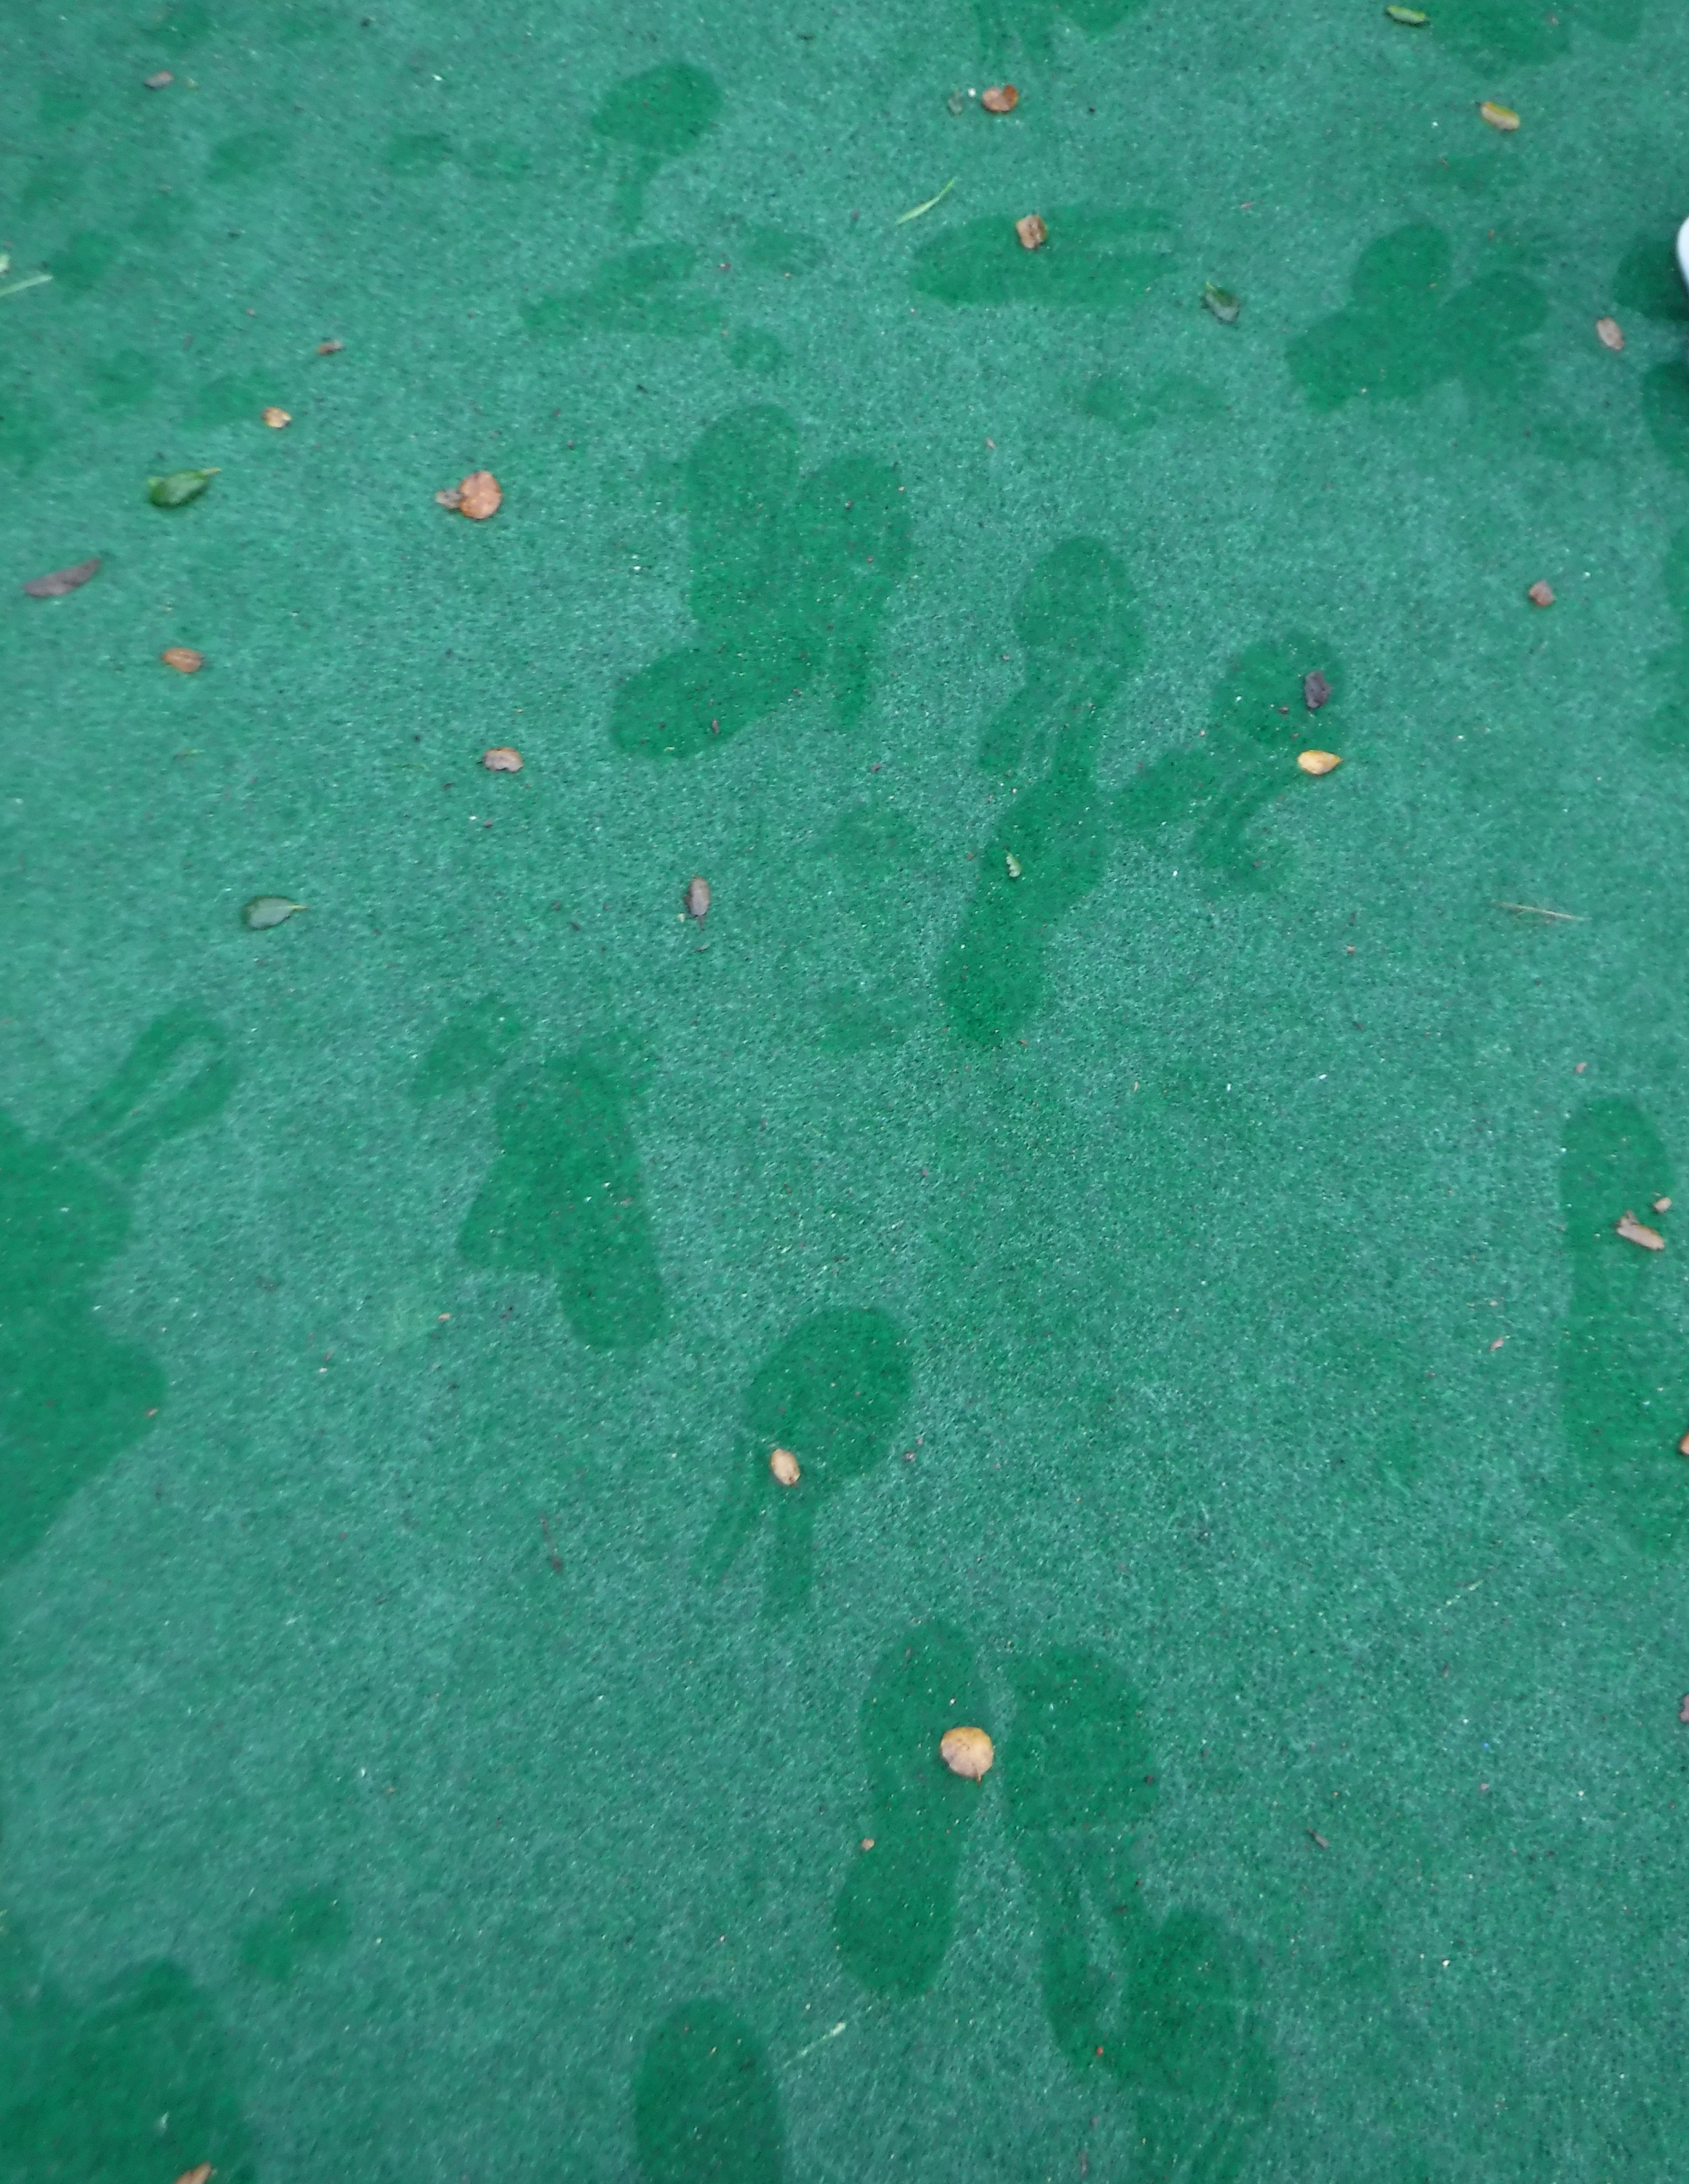 Photo I took of kids&#039; footprints in the play yard at work